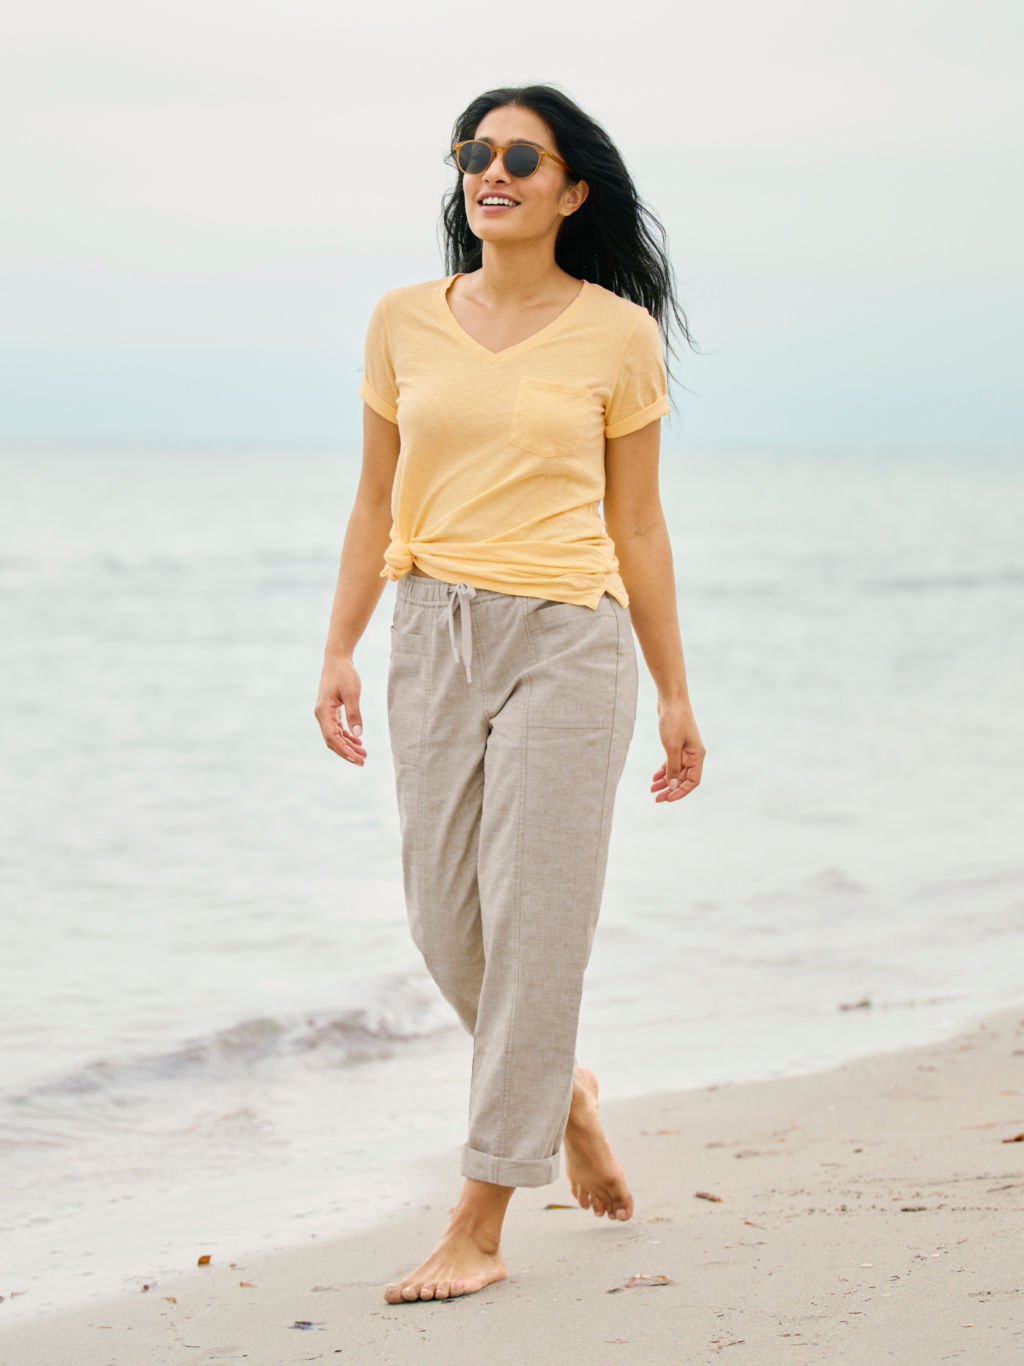 A woman walks along the beach wearing linen pants and a yellow t-shirt in a knot at the waist.